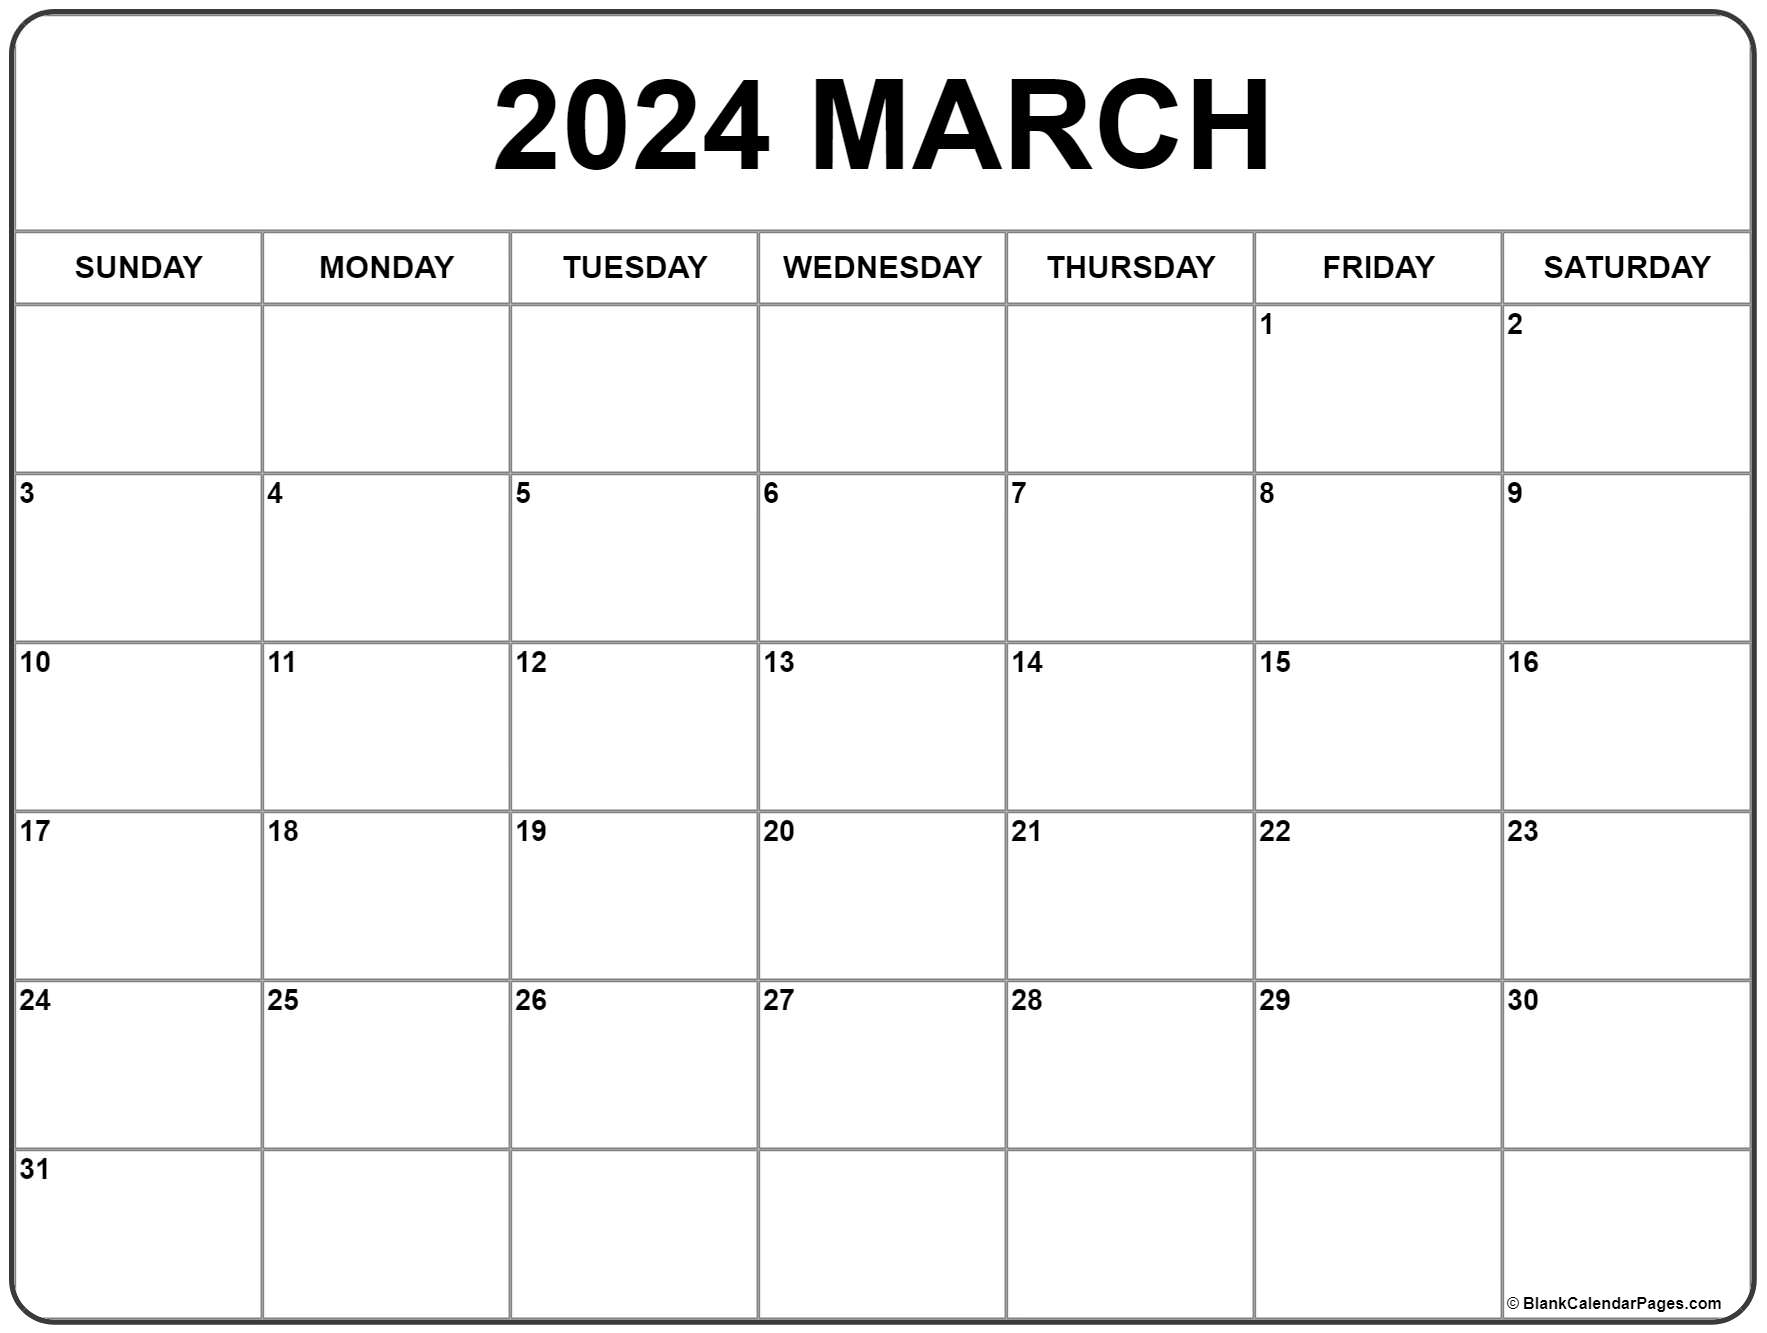 March 2021 calendar | free printable monthly calendars